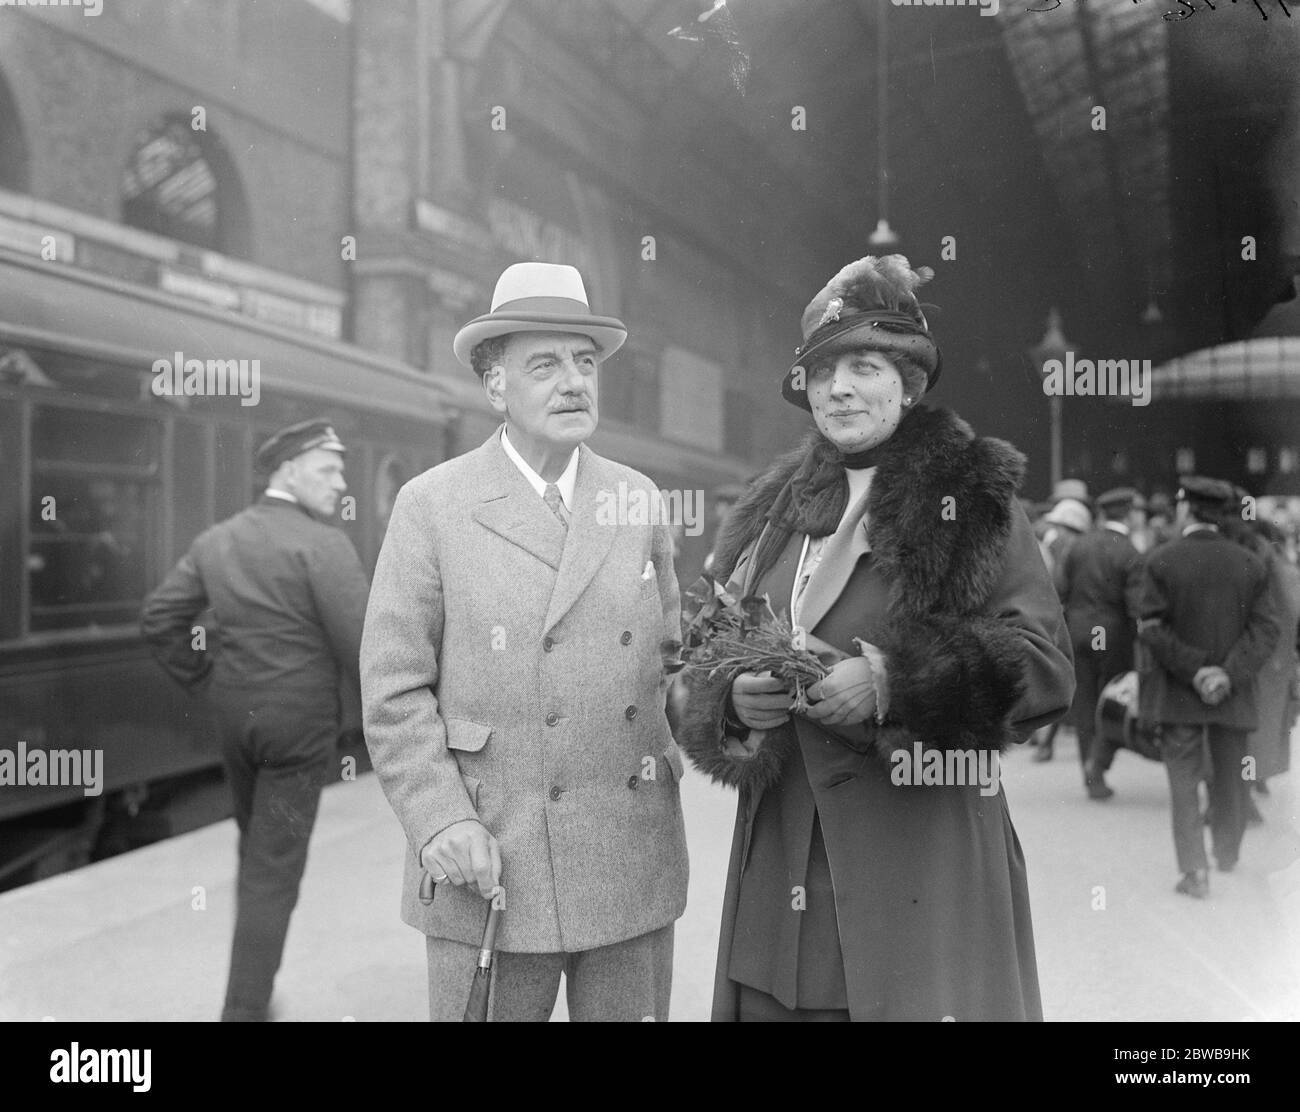 Mme Hilda Roosevelt , niece of the late Theodore Roosevelt , arrived at Victoria Station , to sing at La Scala in Mr Isidore de Lara ' s opera  The Three Musketeers  . With Mme Roosevelt is Mr Isidore de Lara . 9 June 1924 Stock Photo